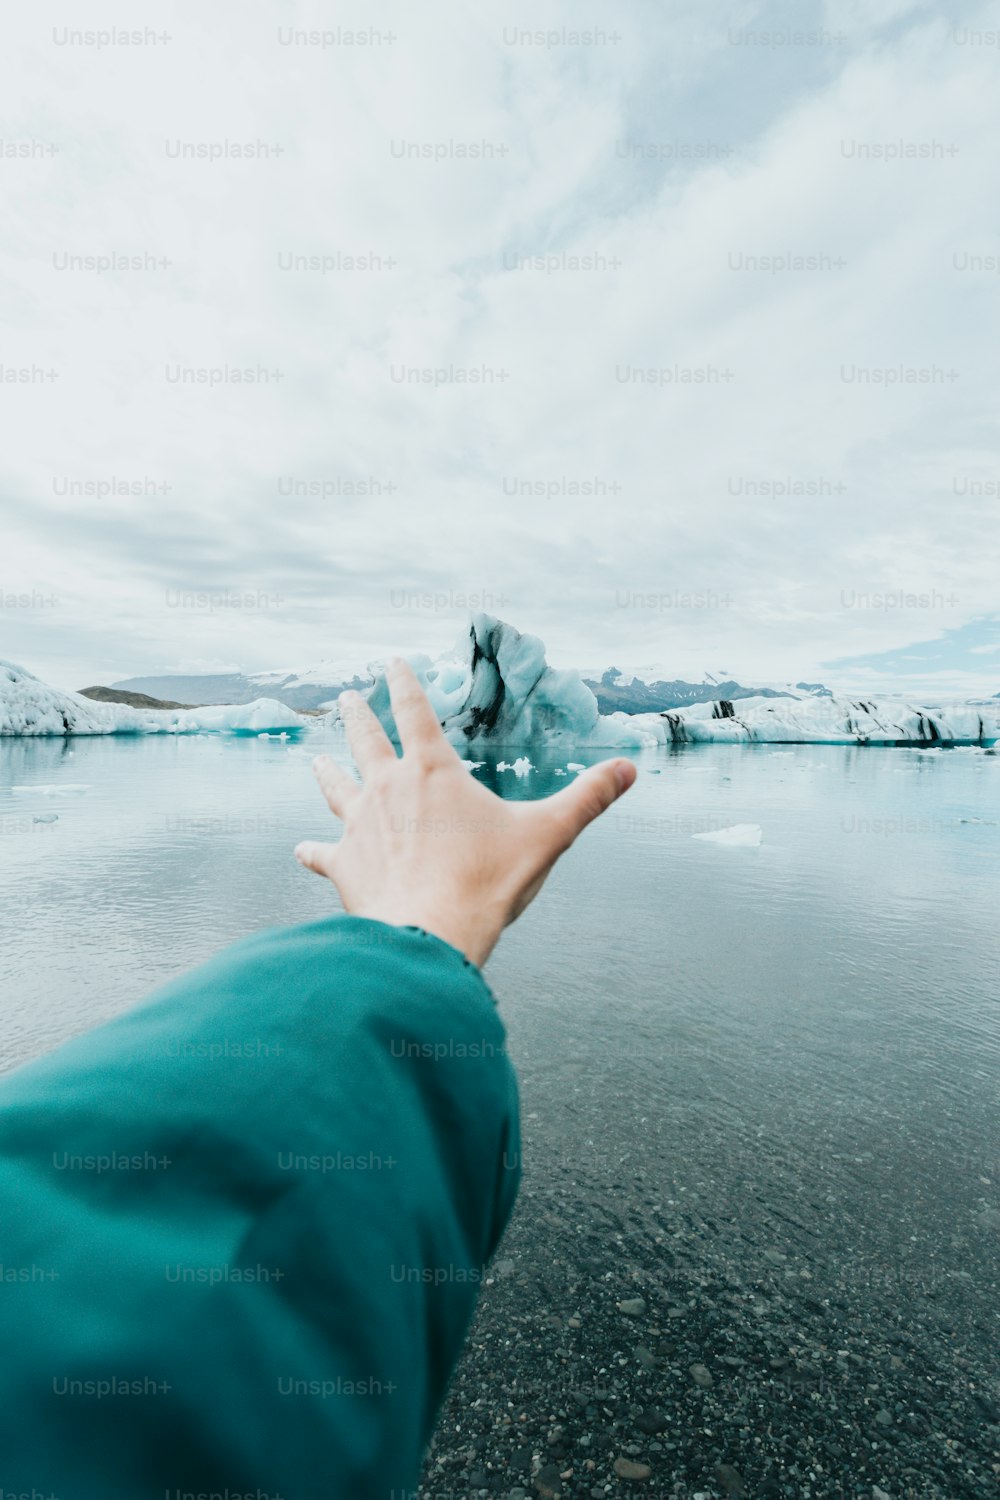 a person's hand reaching for an iceberg in the water